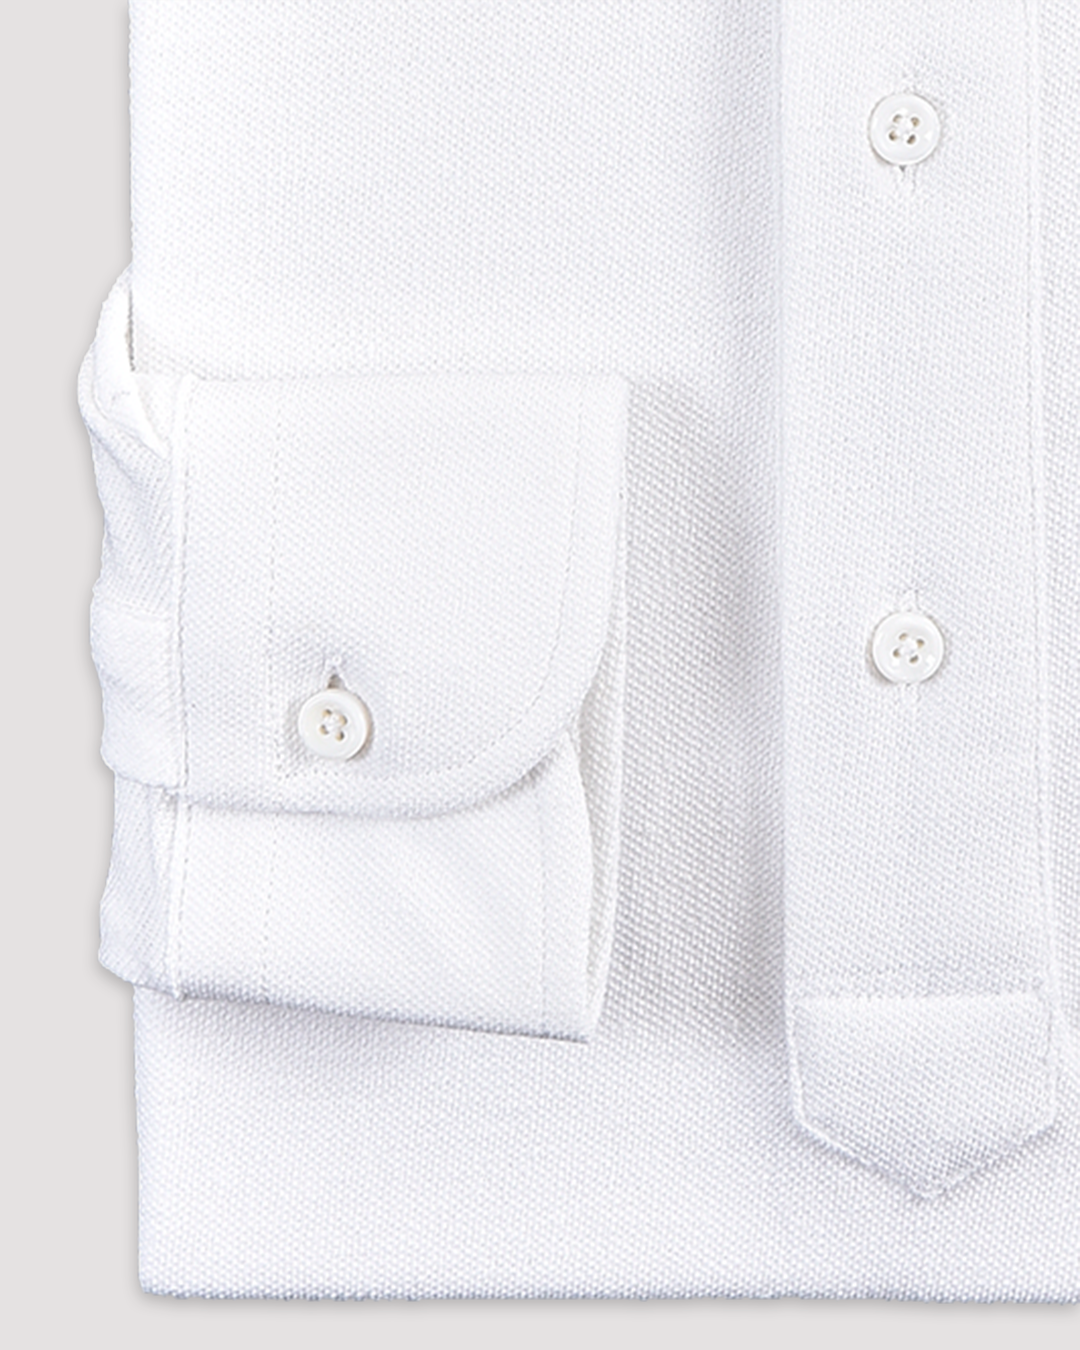 Cuff of the custom oxford polo shirt for men by Luxire in pure white